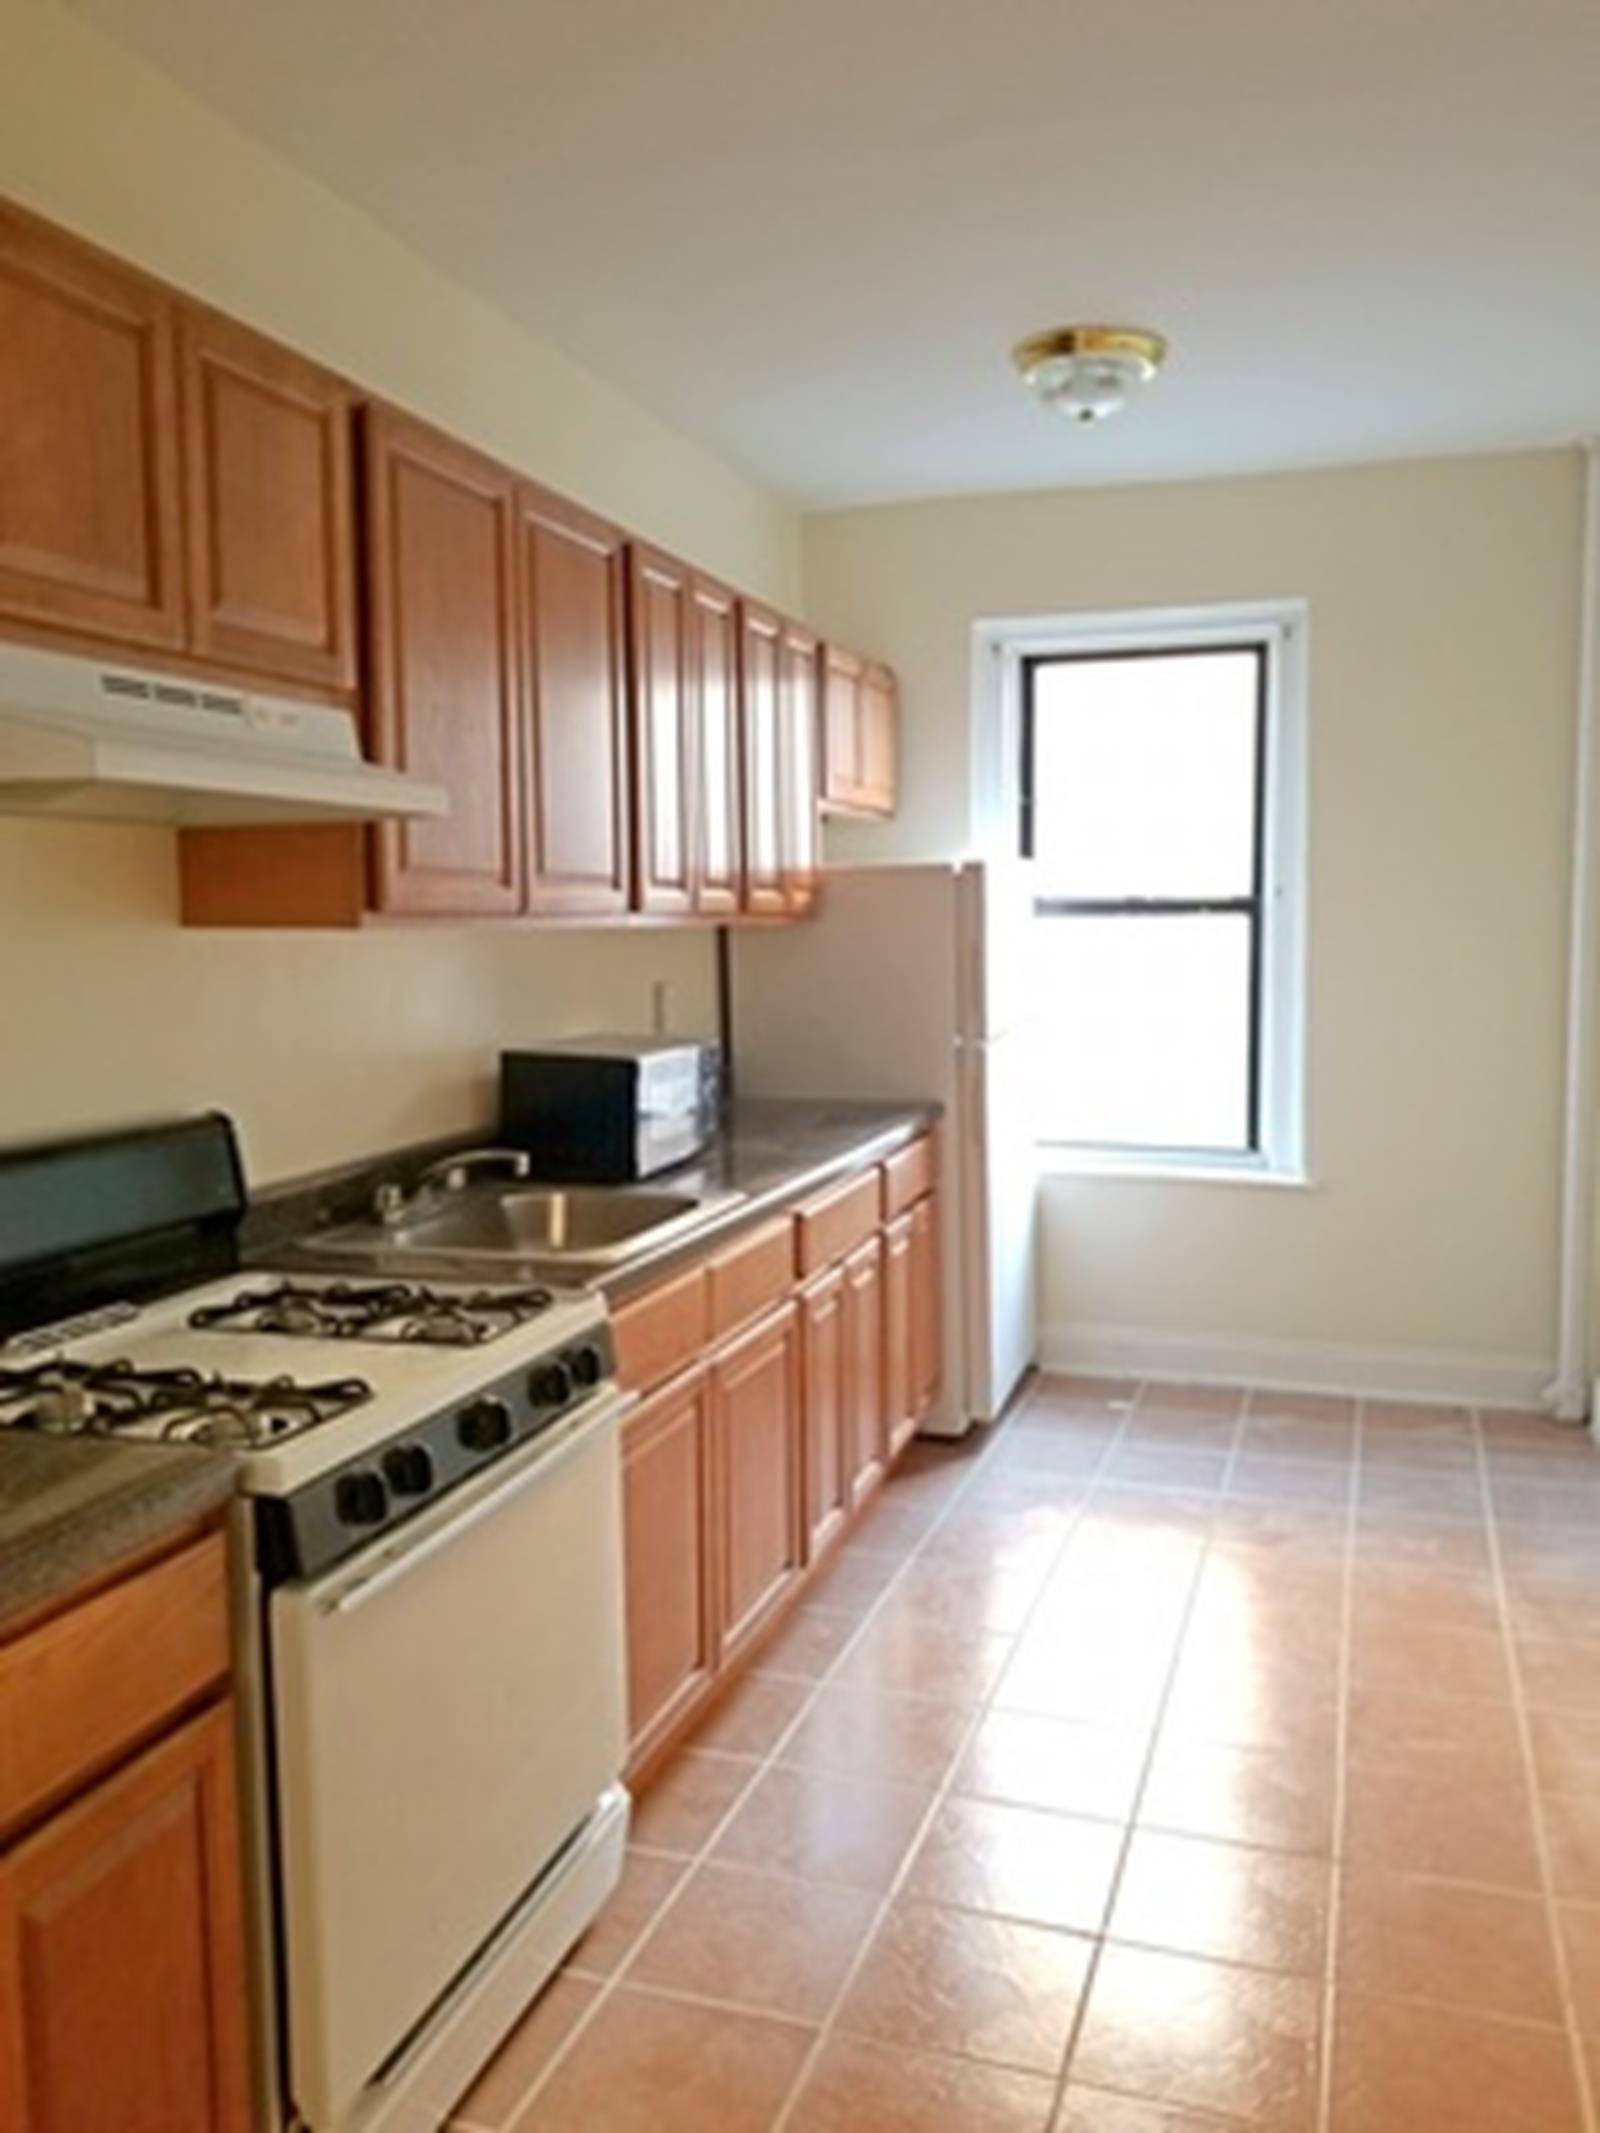 BEAUTIFUL RENOVATED 1 BEDROOMThis spectacular Renovated apartment is not only large and spacious but also features gorgeous hard wood floors, a large living room, king sized bed room, modern kitchen ...